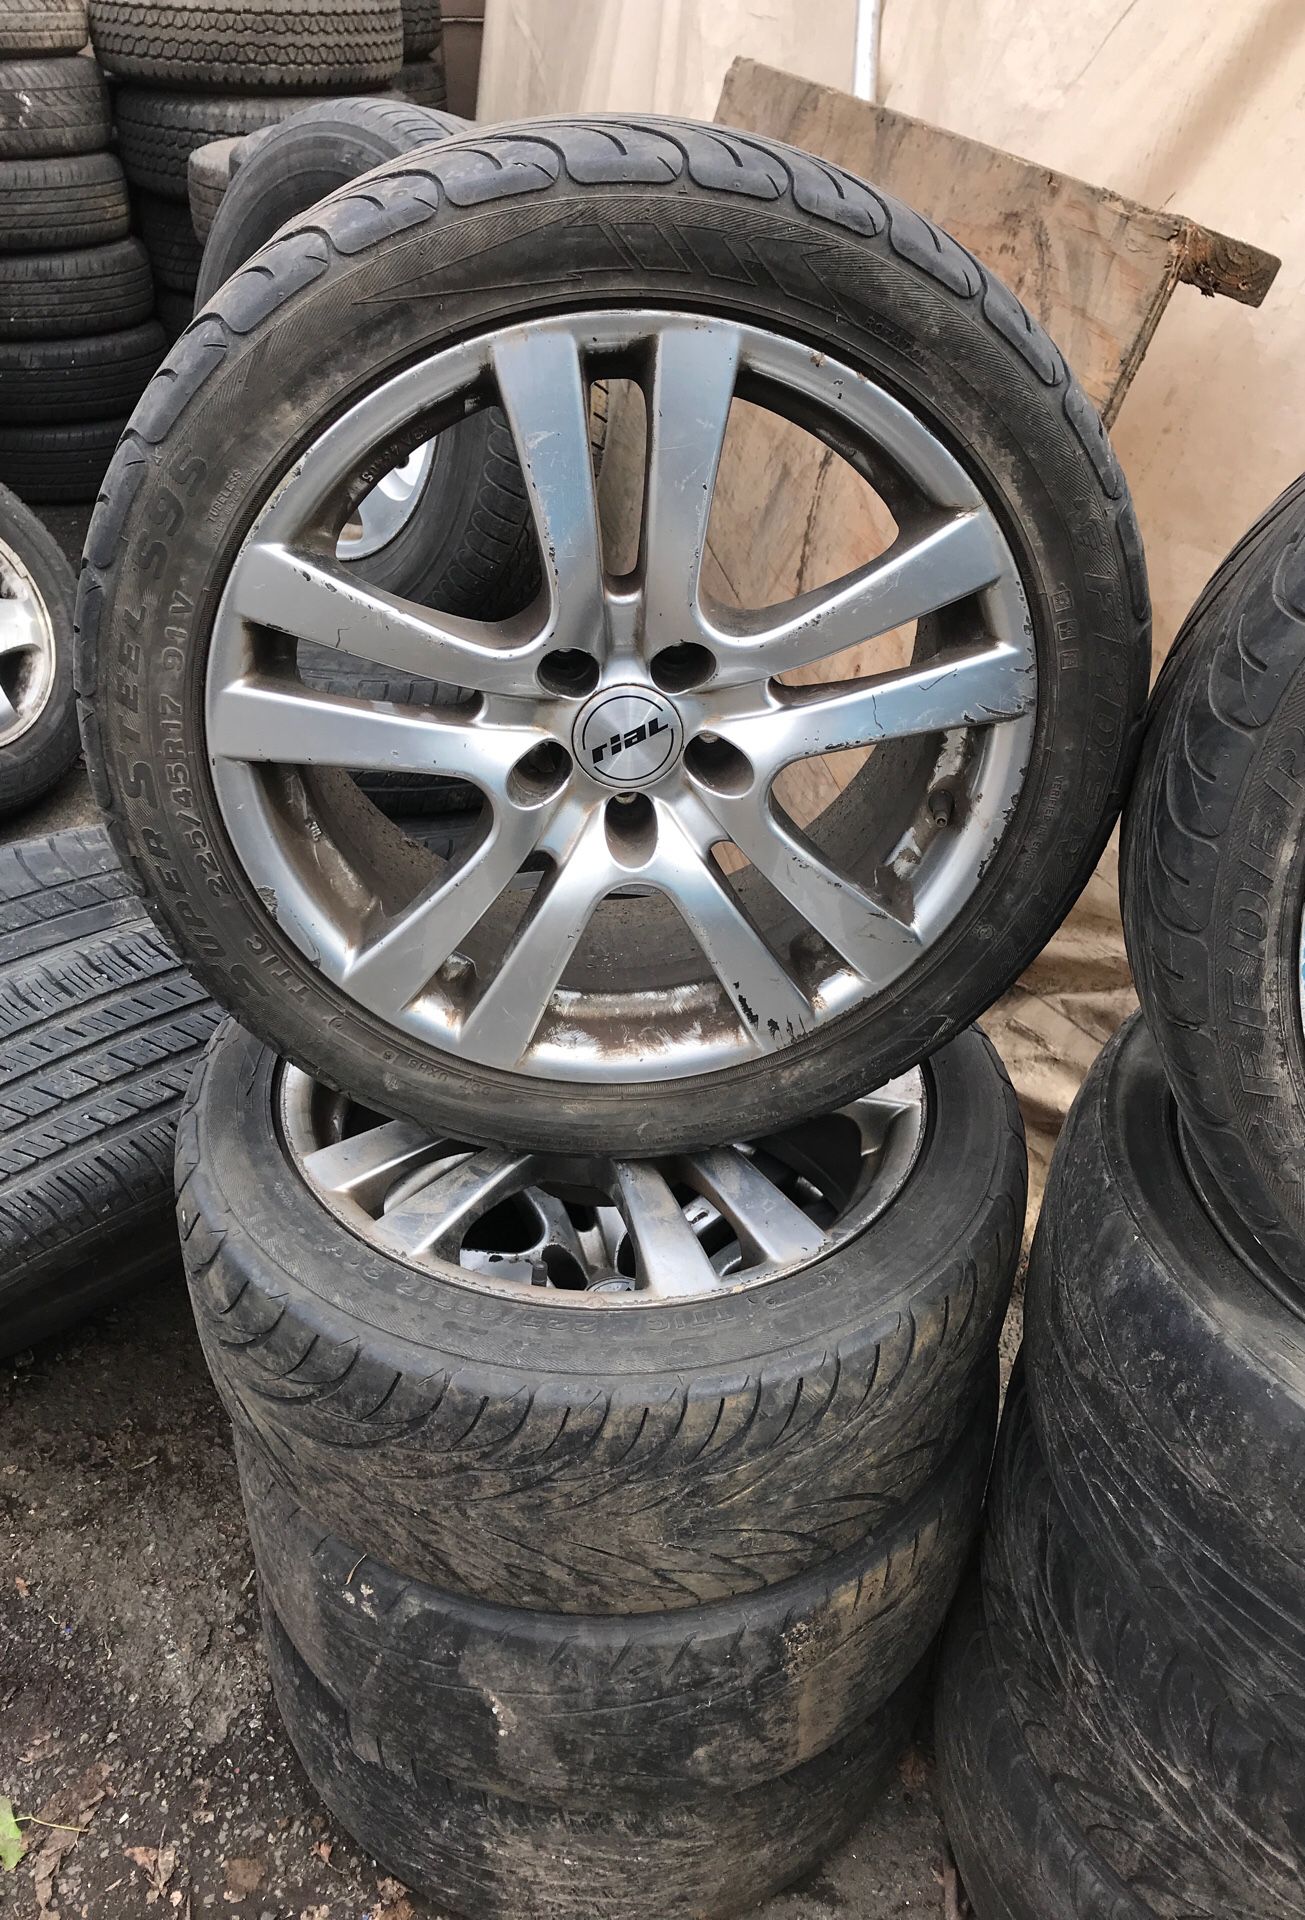 4 17” Rial Wheels / rims alloy 5x4.5 5x114.3 with Tires 225/45/17